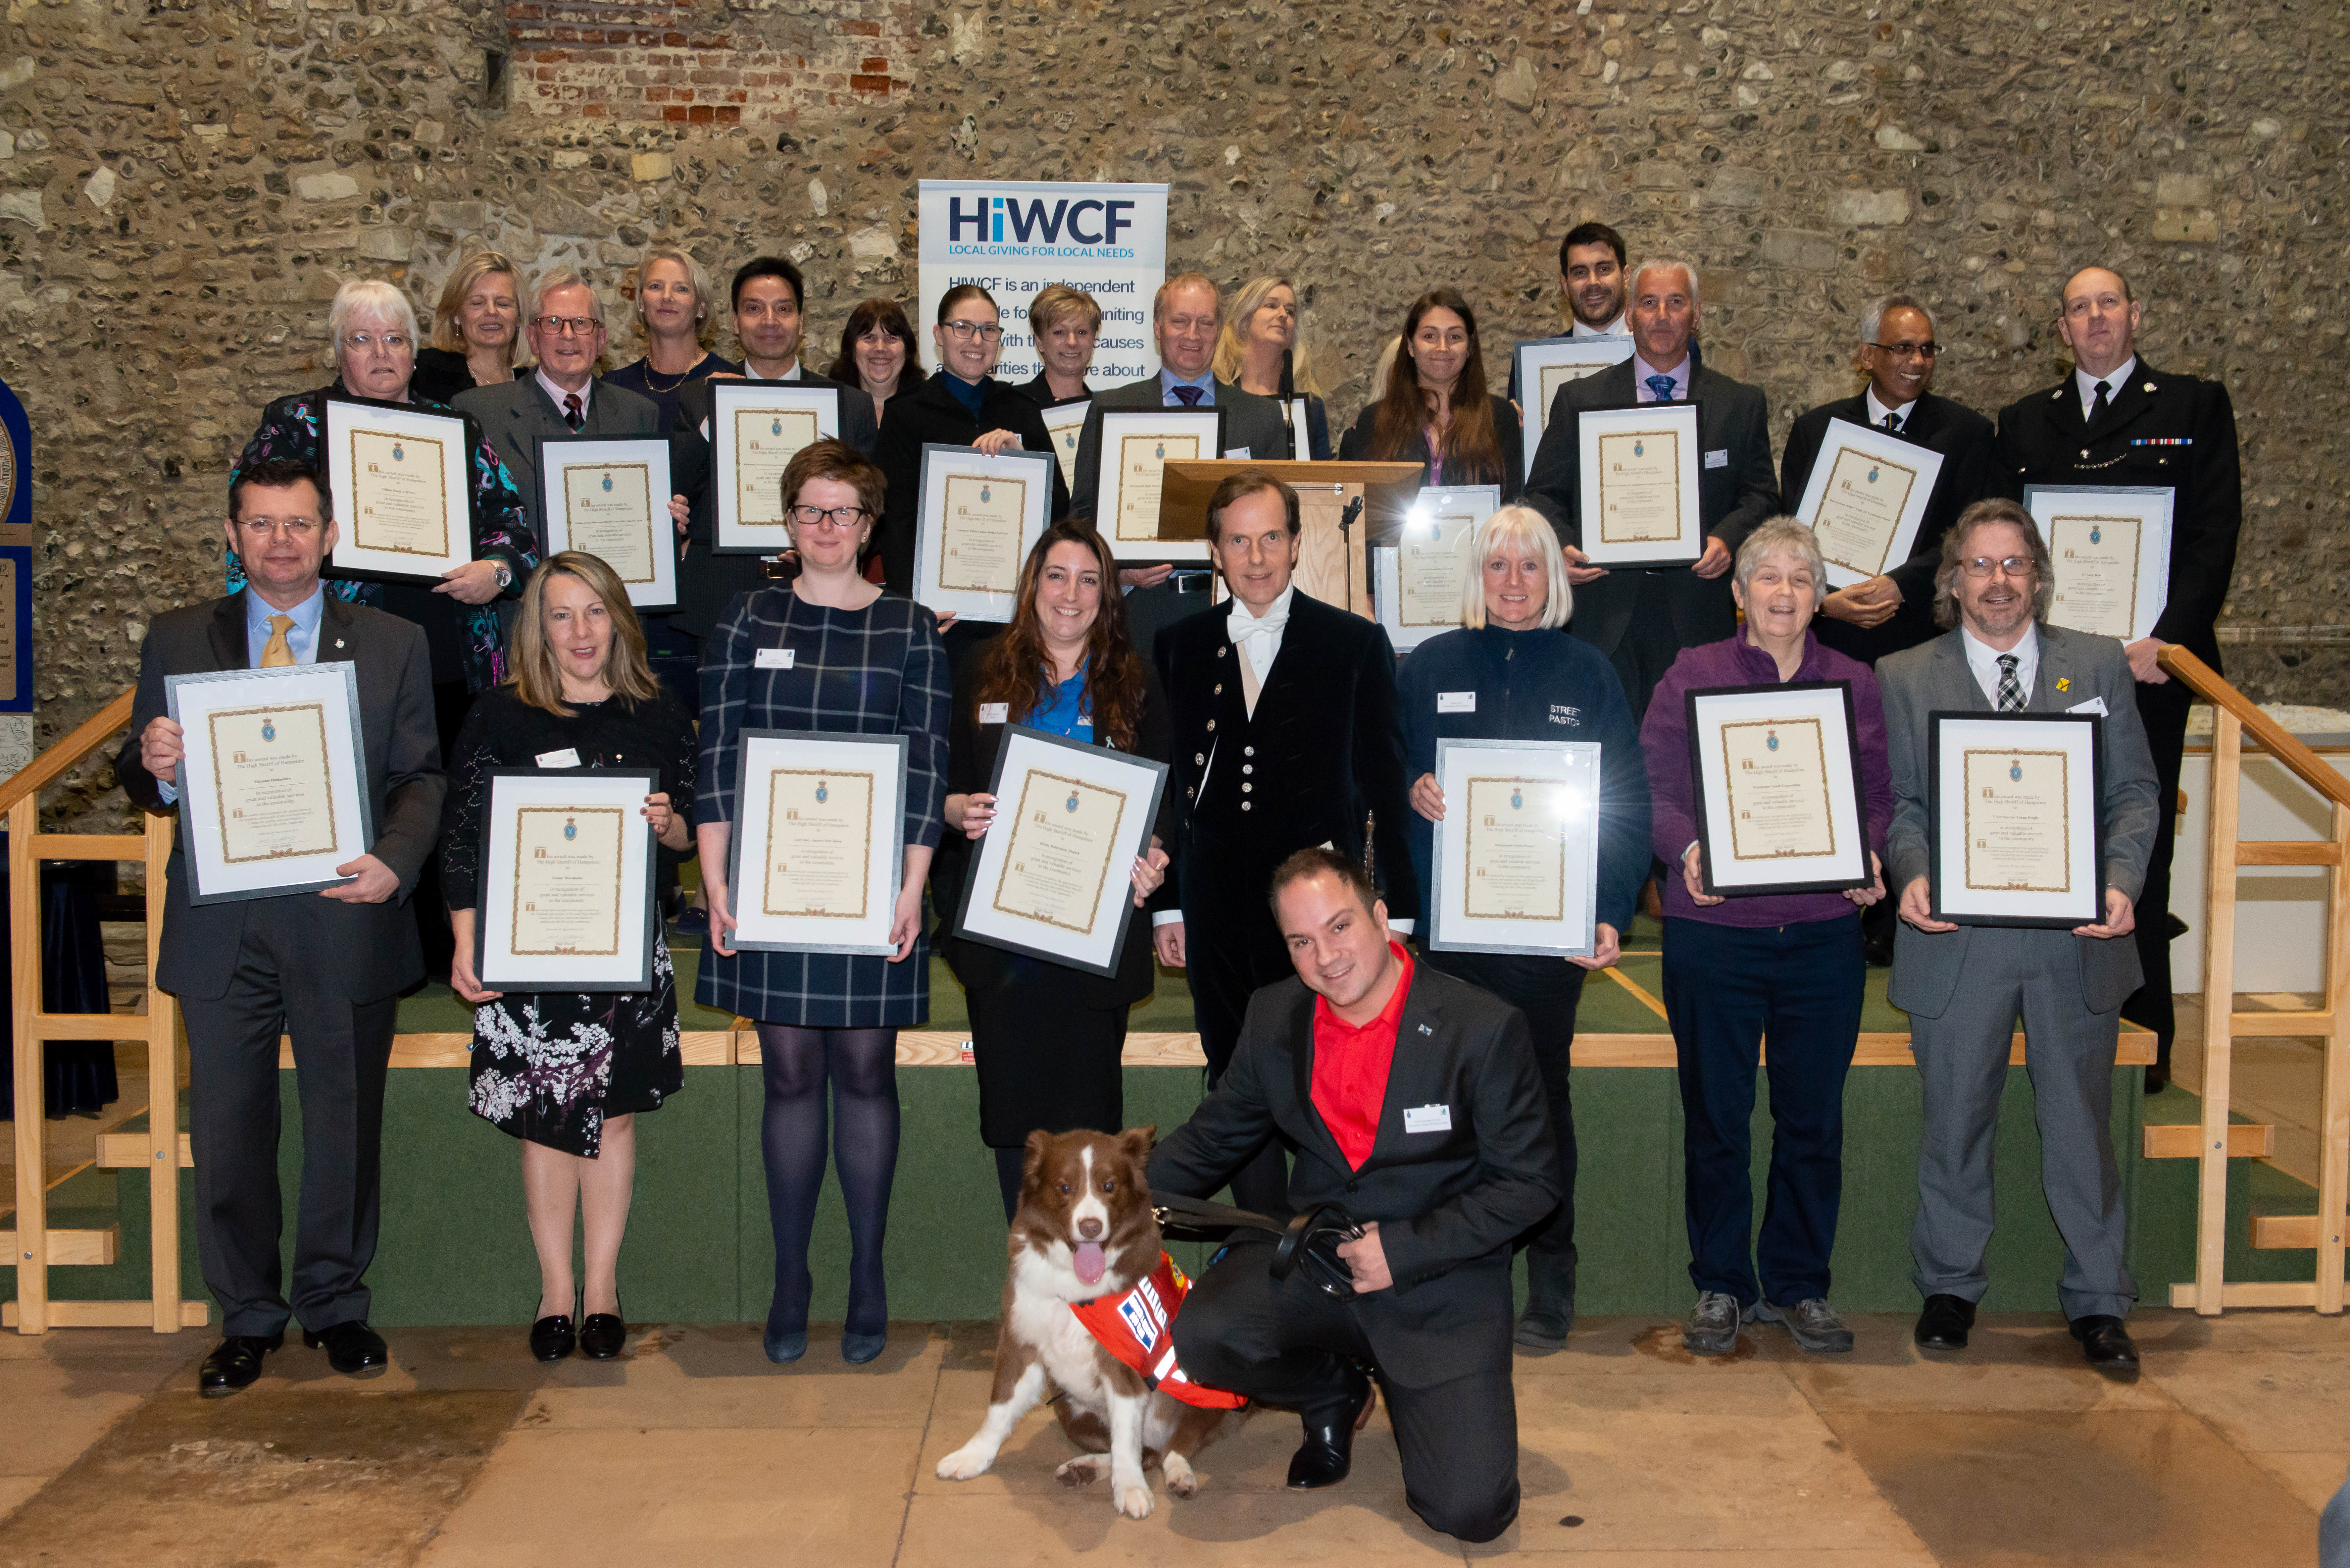 Kev Saunders wins Hampshire High Sheriff Award for 'Going beyond the Call of Duty' 
(Pictured: Kev Saunders & Search Dog Zak from Hampshire Search & Rescue Dogs) 